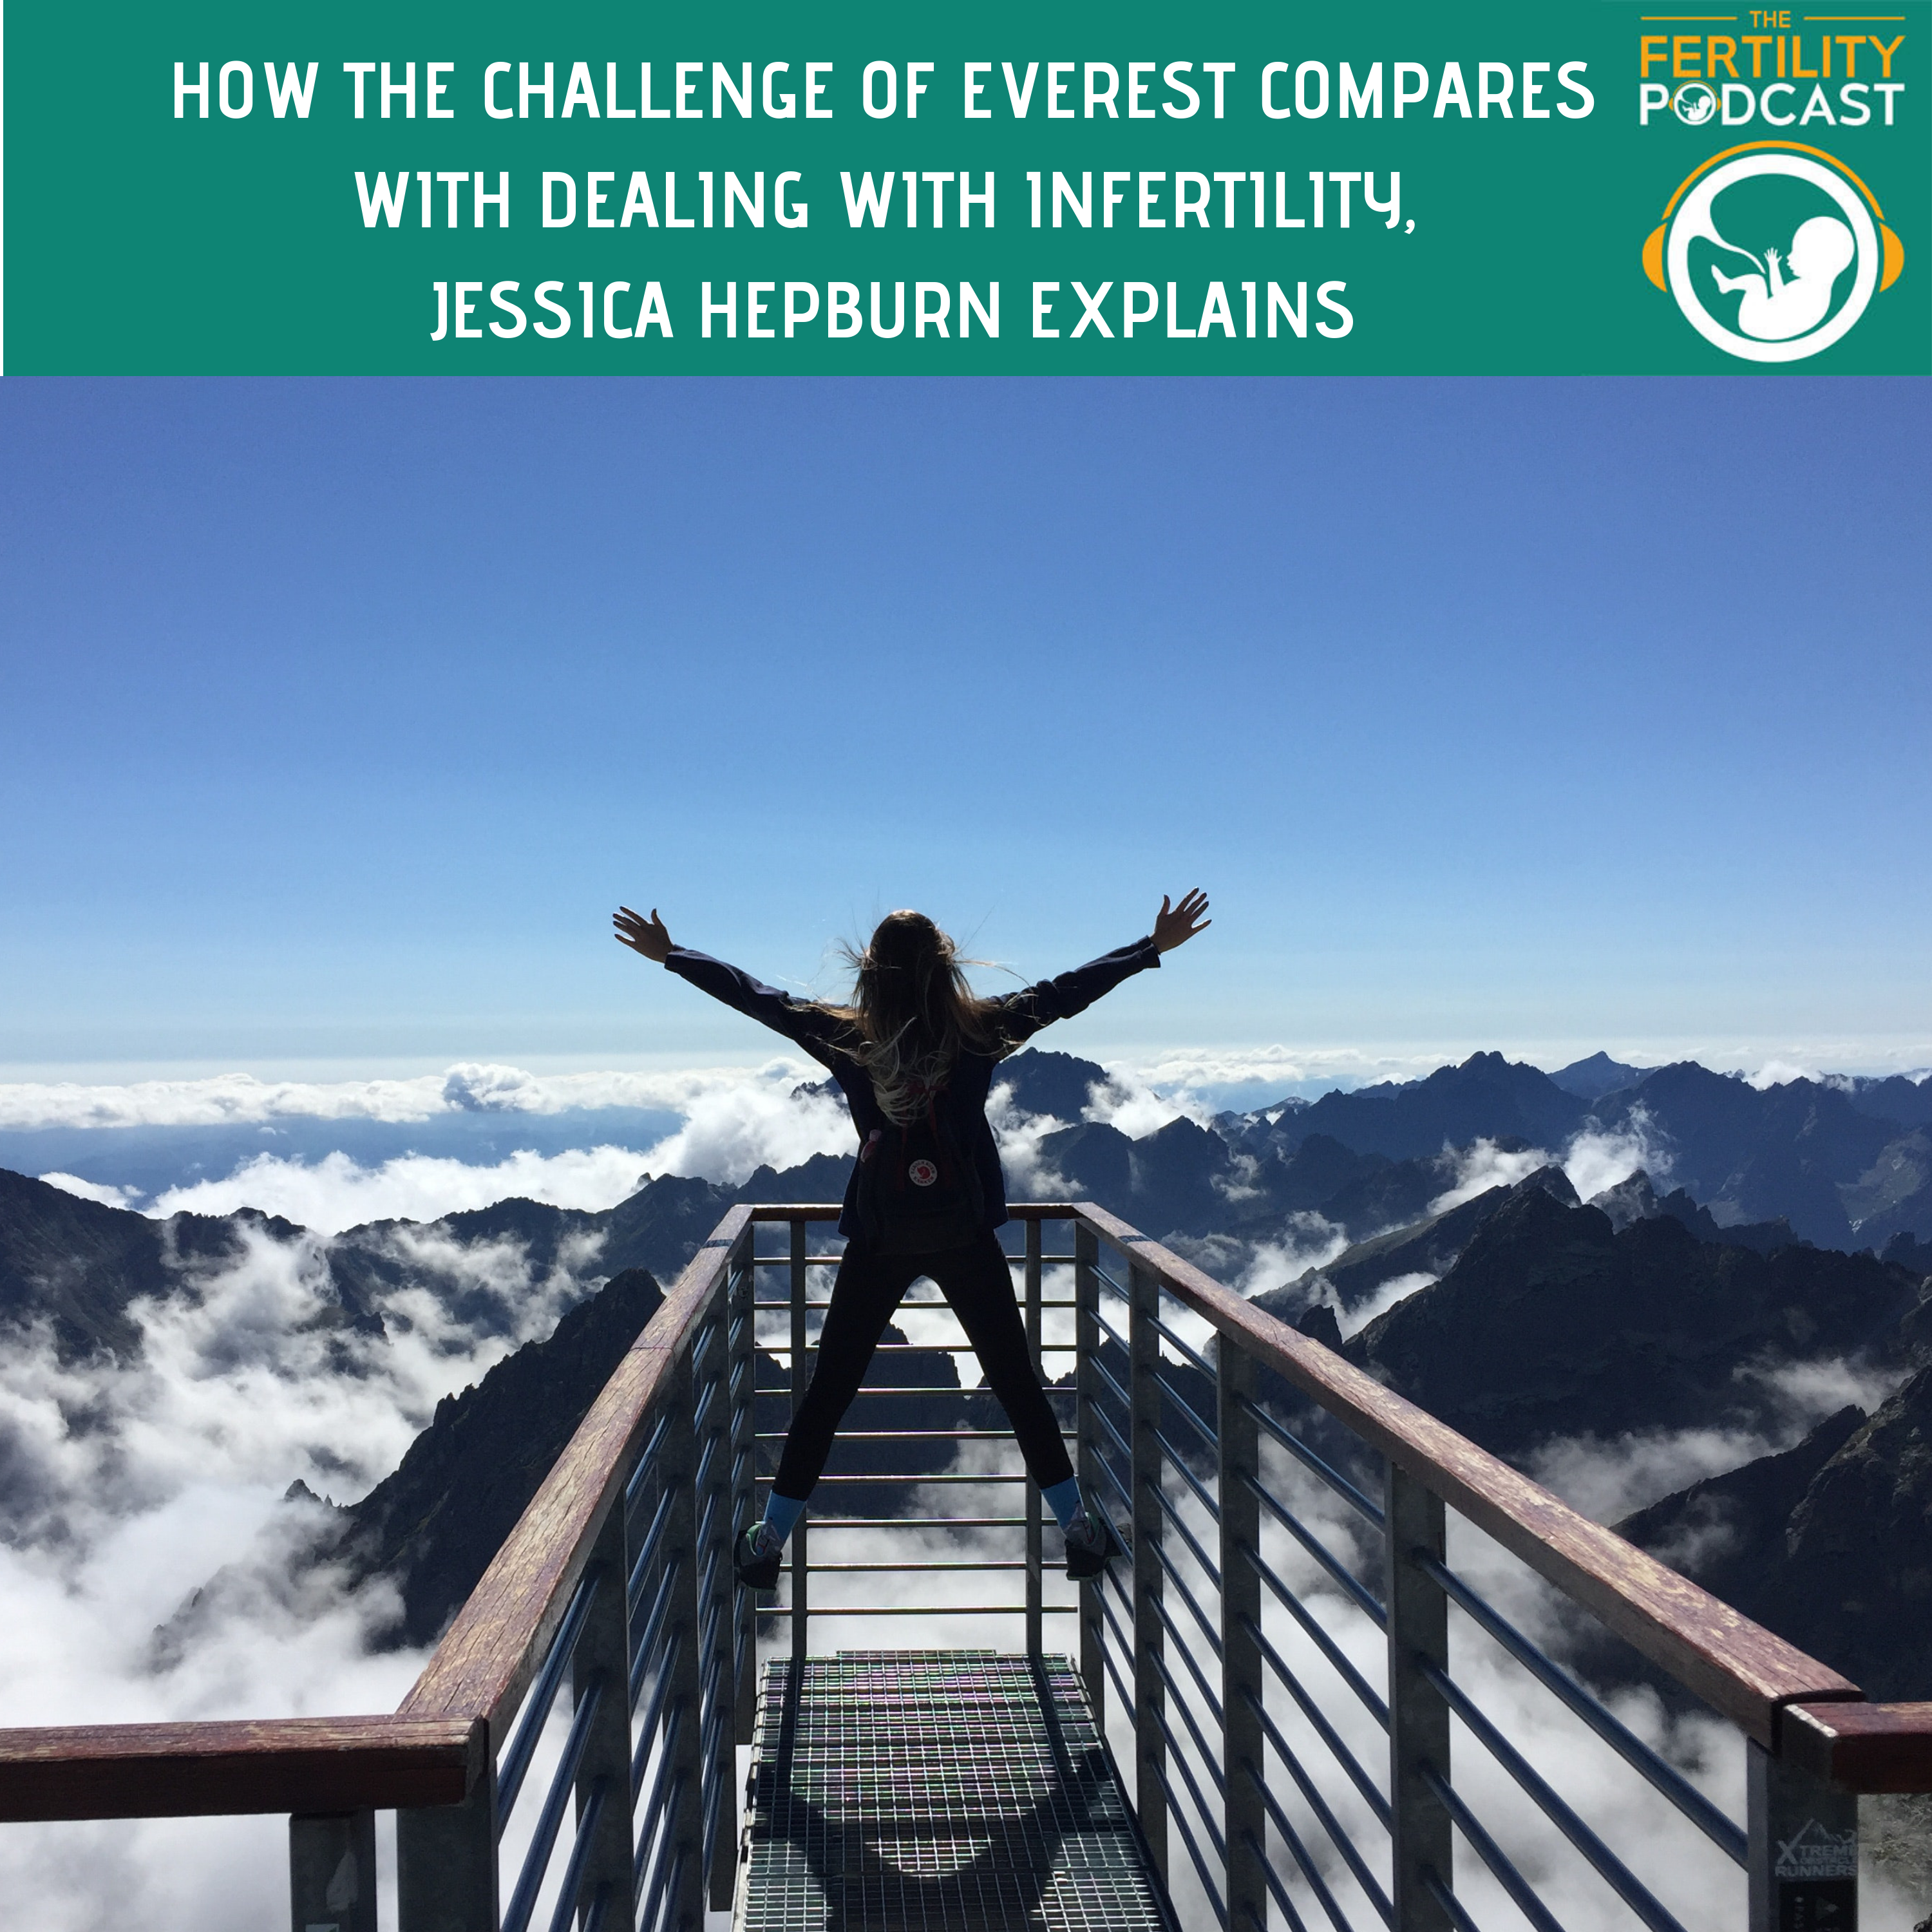 How the challenge of Everest compares with dealing with infertility